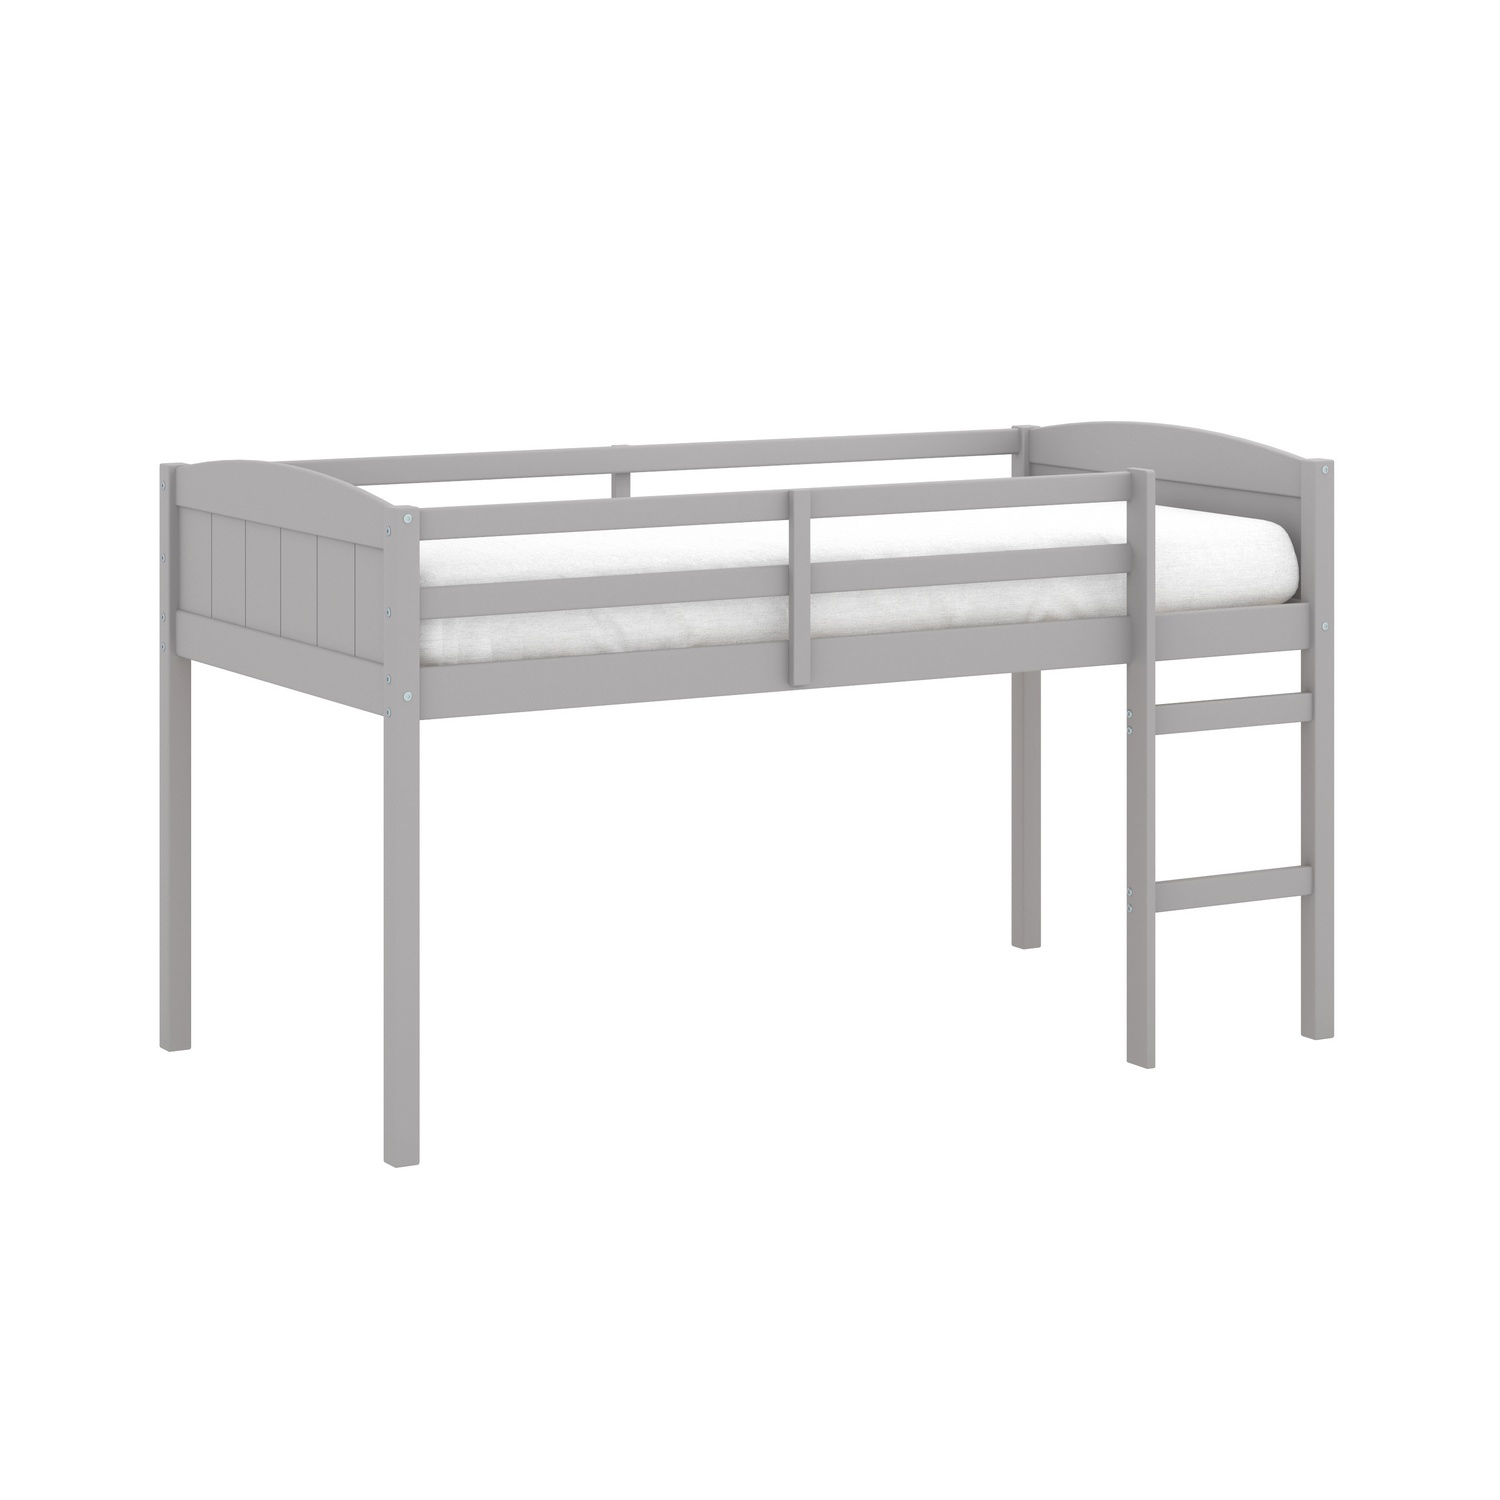 Hillsdale Alexis Wood Arch Twin Loft Bed - Gray